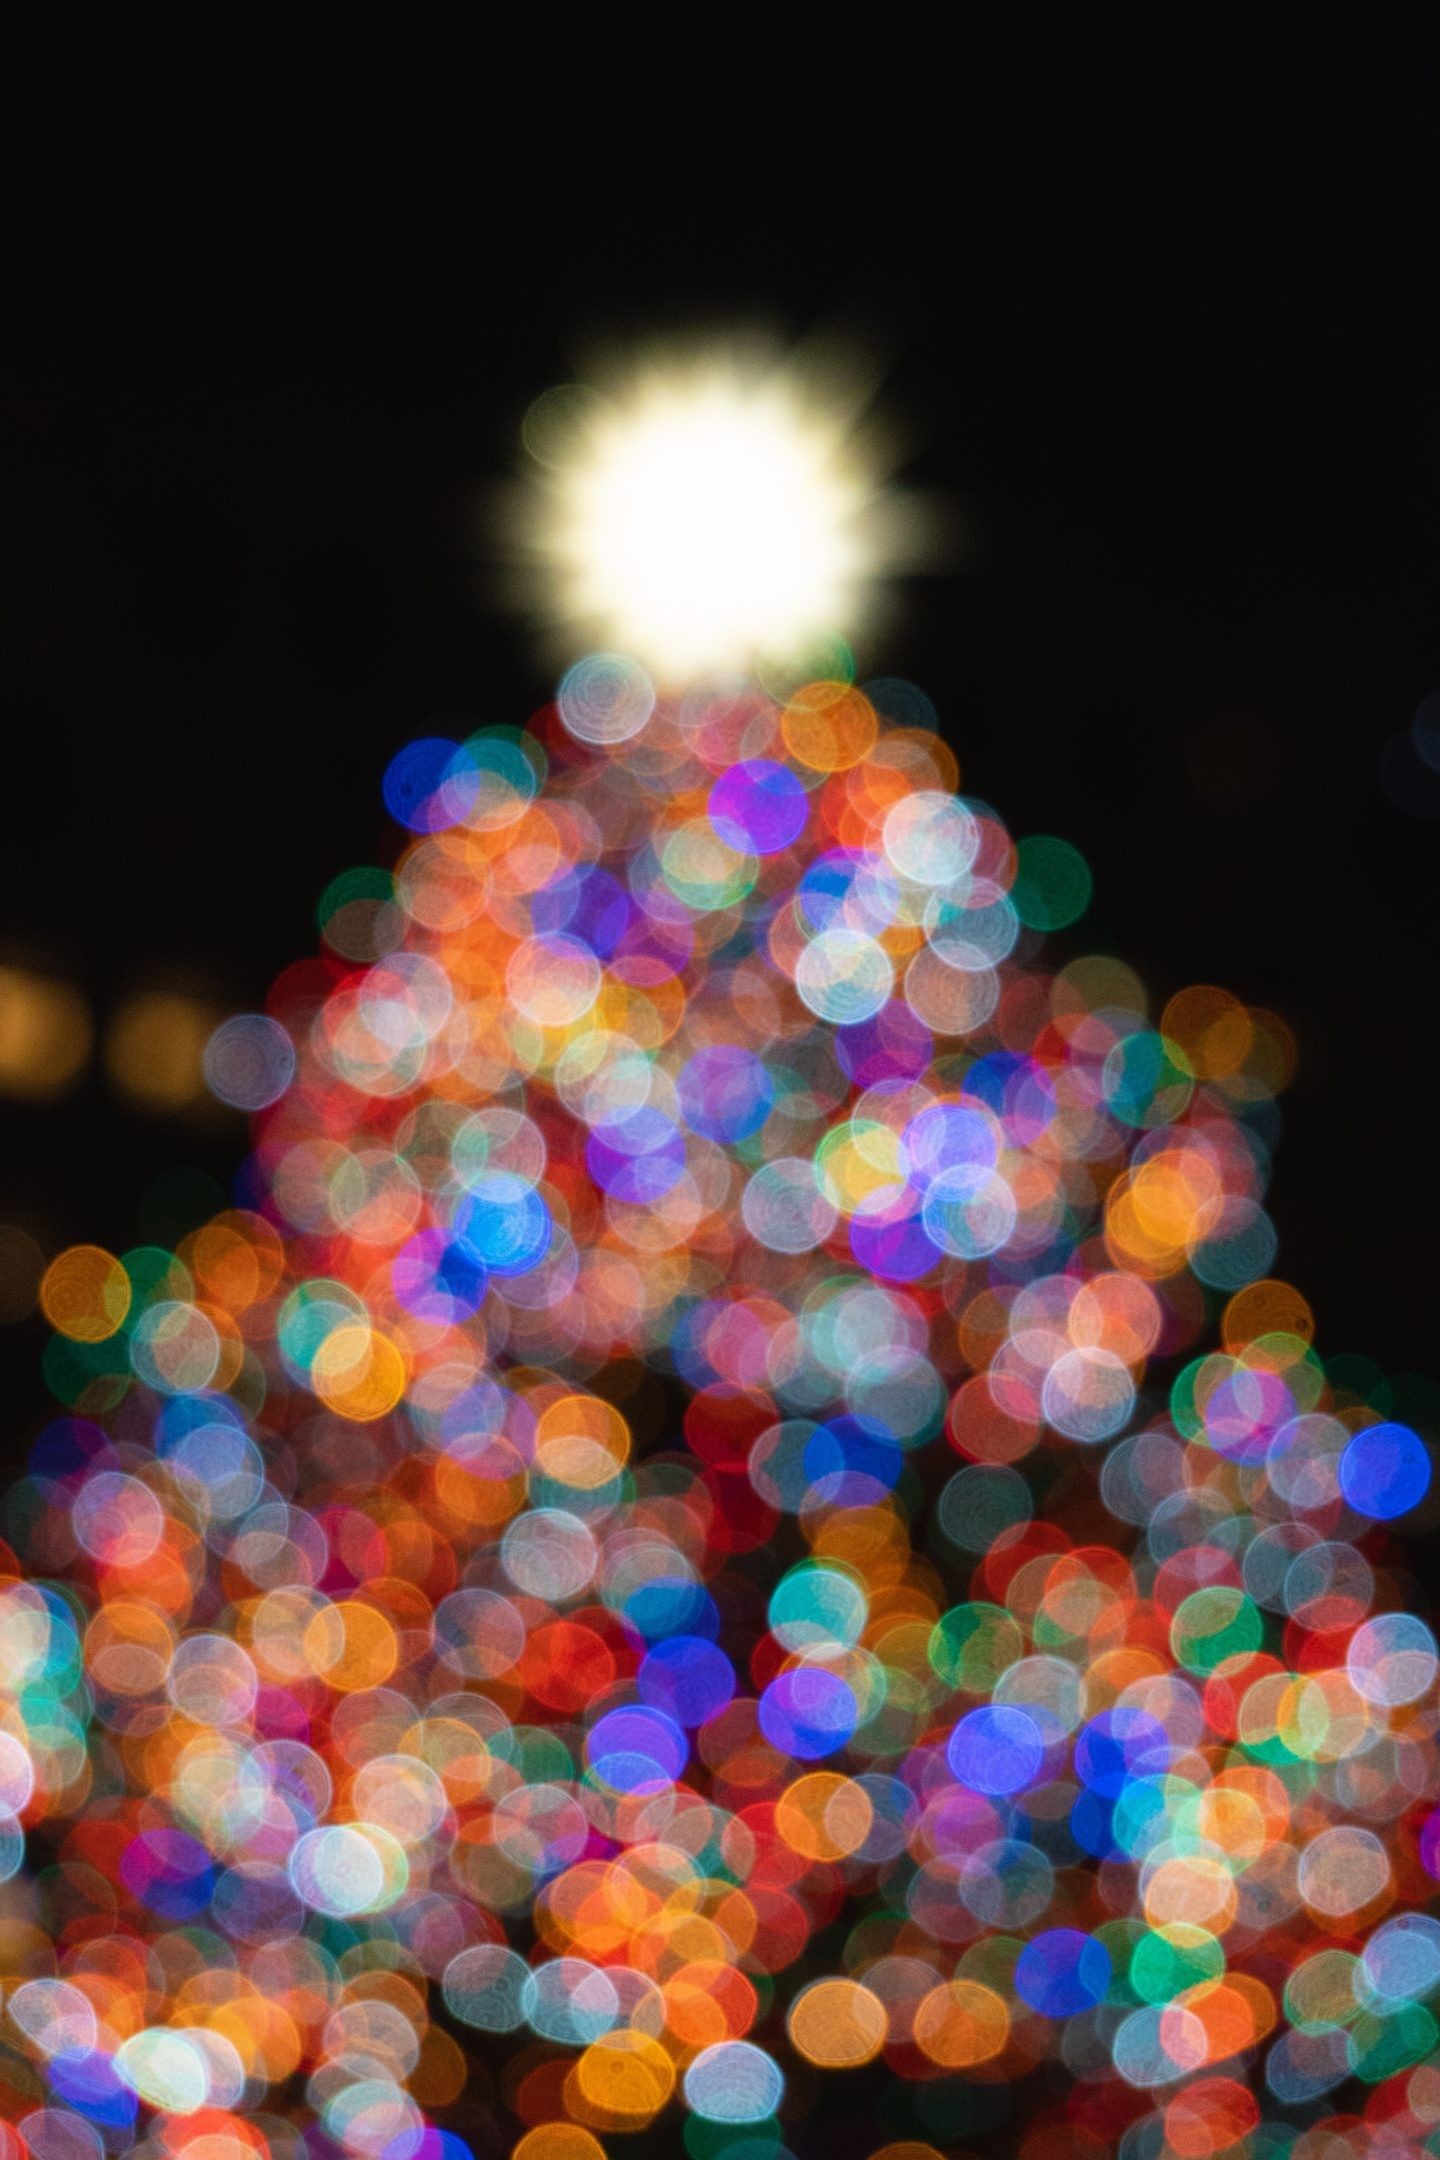 A blurry Christmas tree with a bright star at the top. - Christmas lights